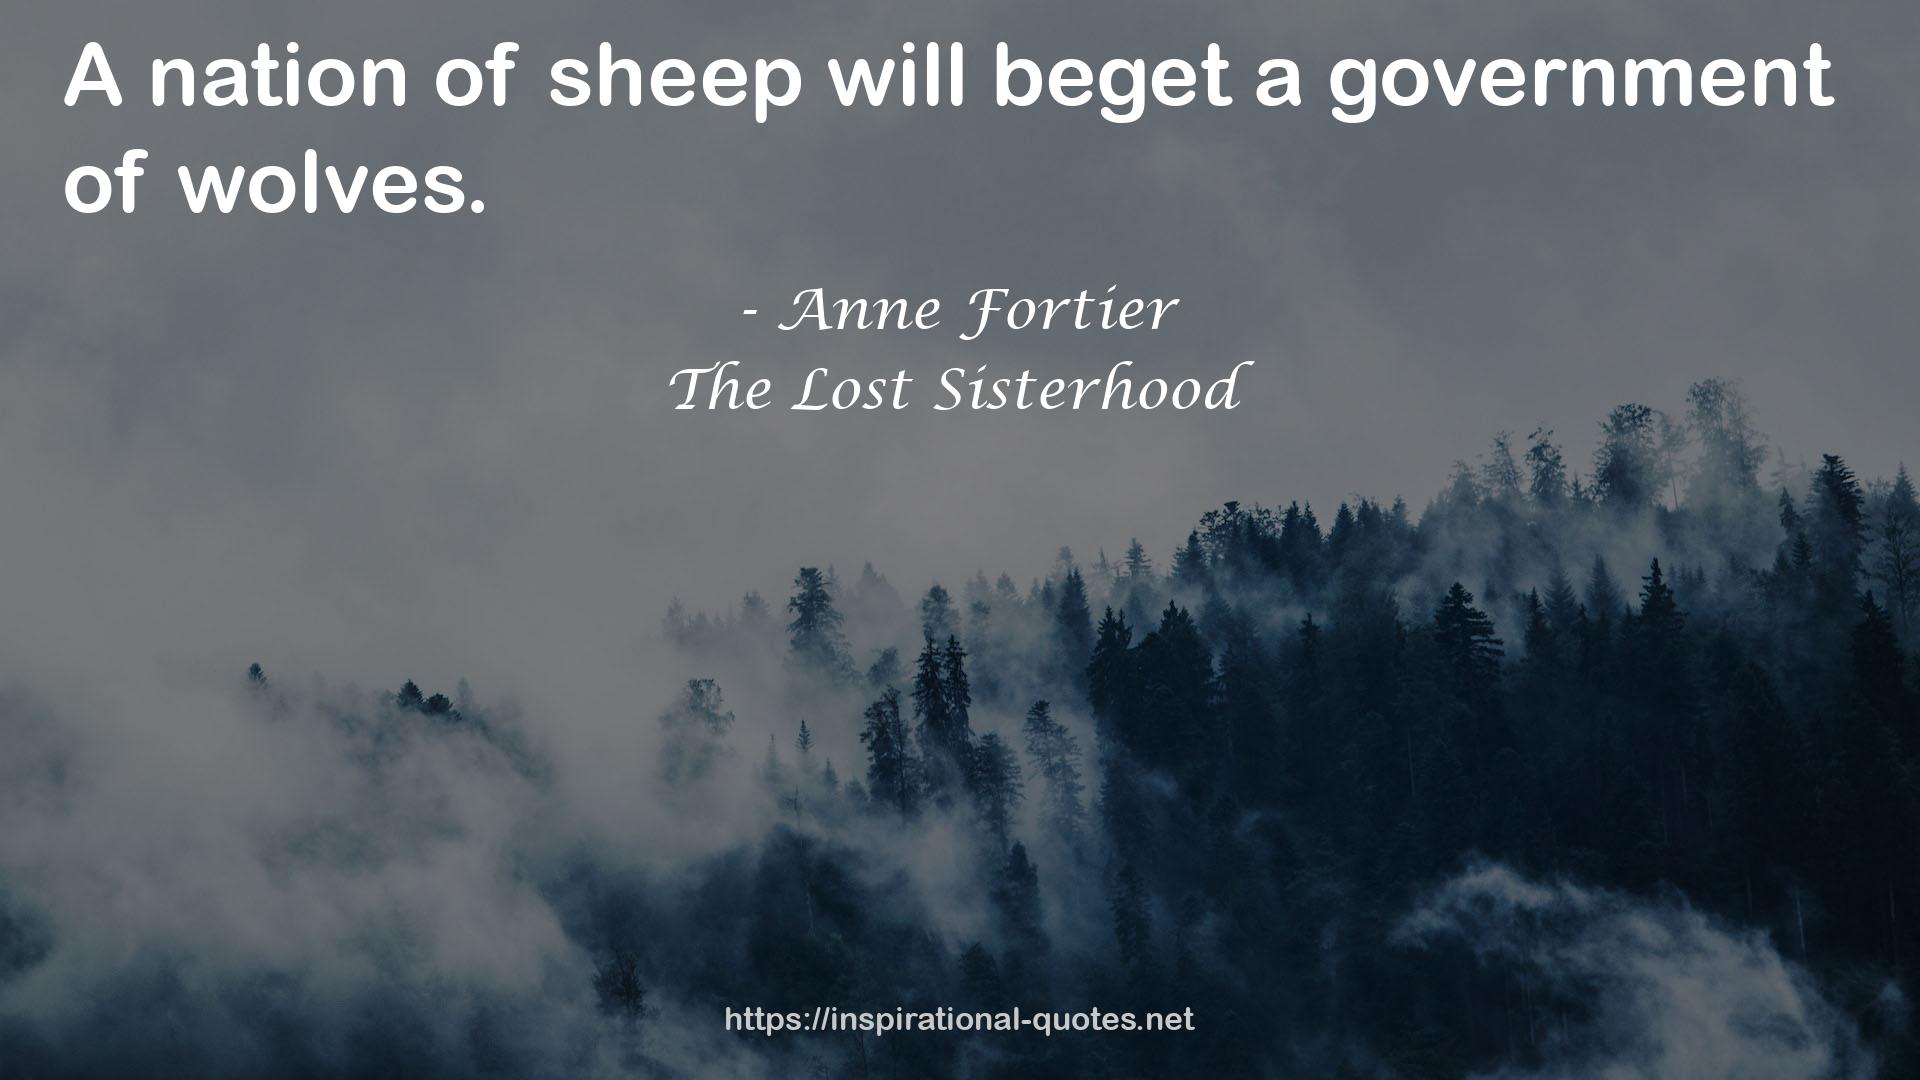 The Lost Sisterhood QUOTES